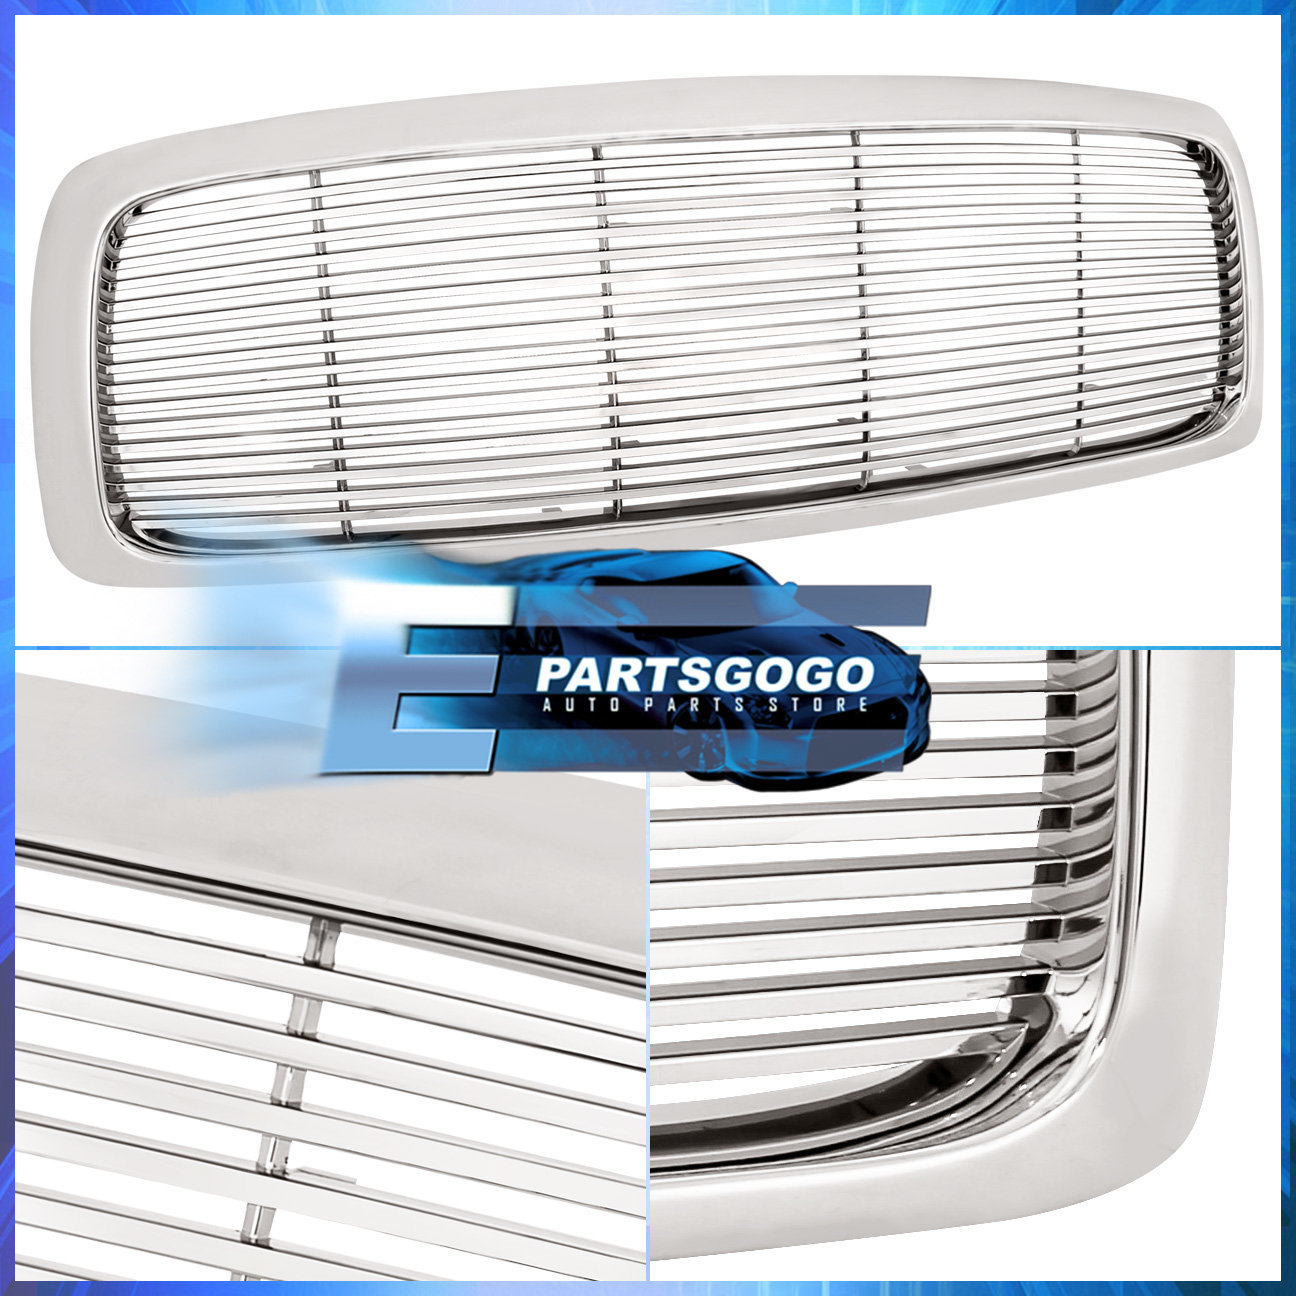 02 03 04 05 Dodge Ram 1500 Pick Up 1 Piece Chrome Front Grille Grill Upgrade eBay